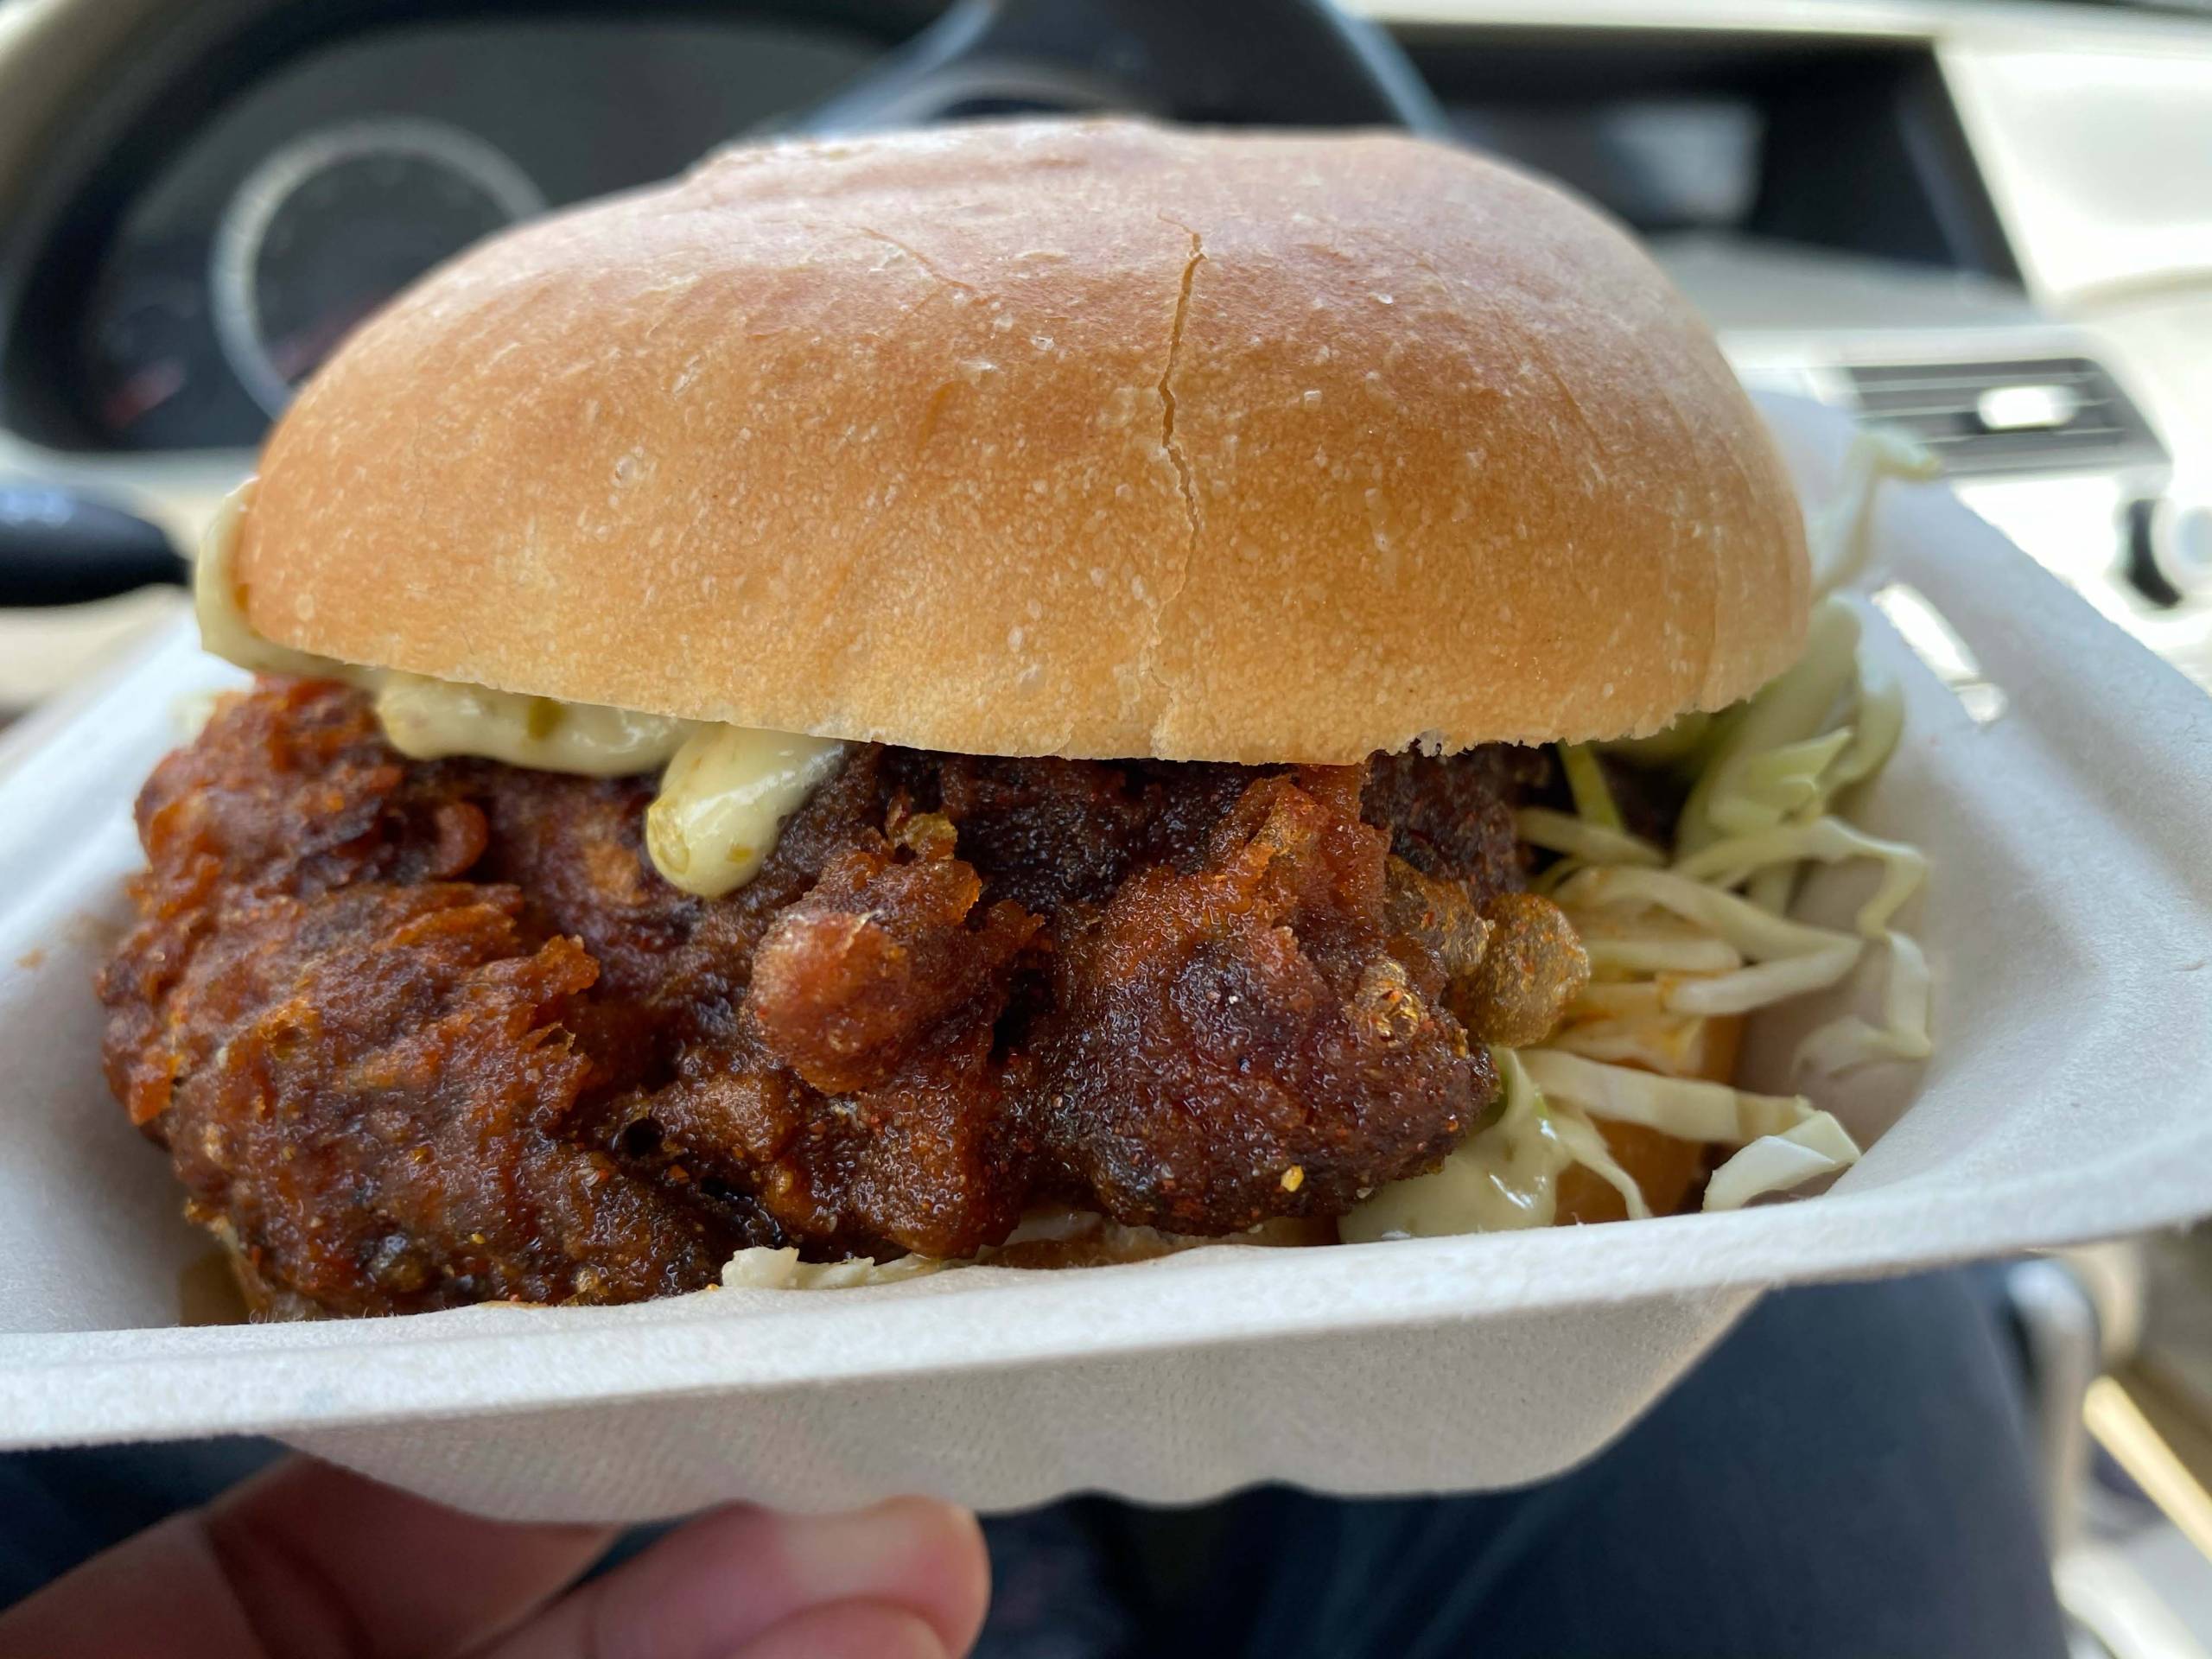 A fried chicken sandwich in a plastic takeout container.